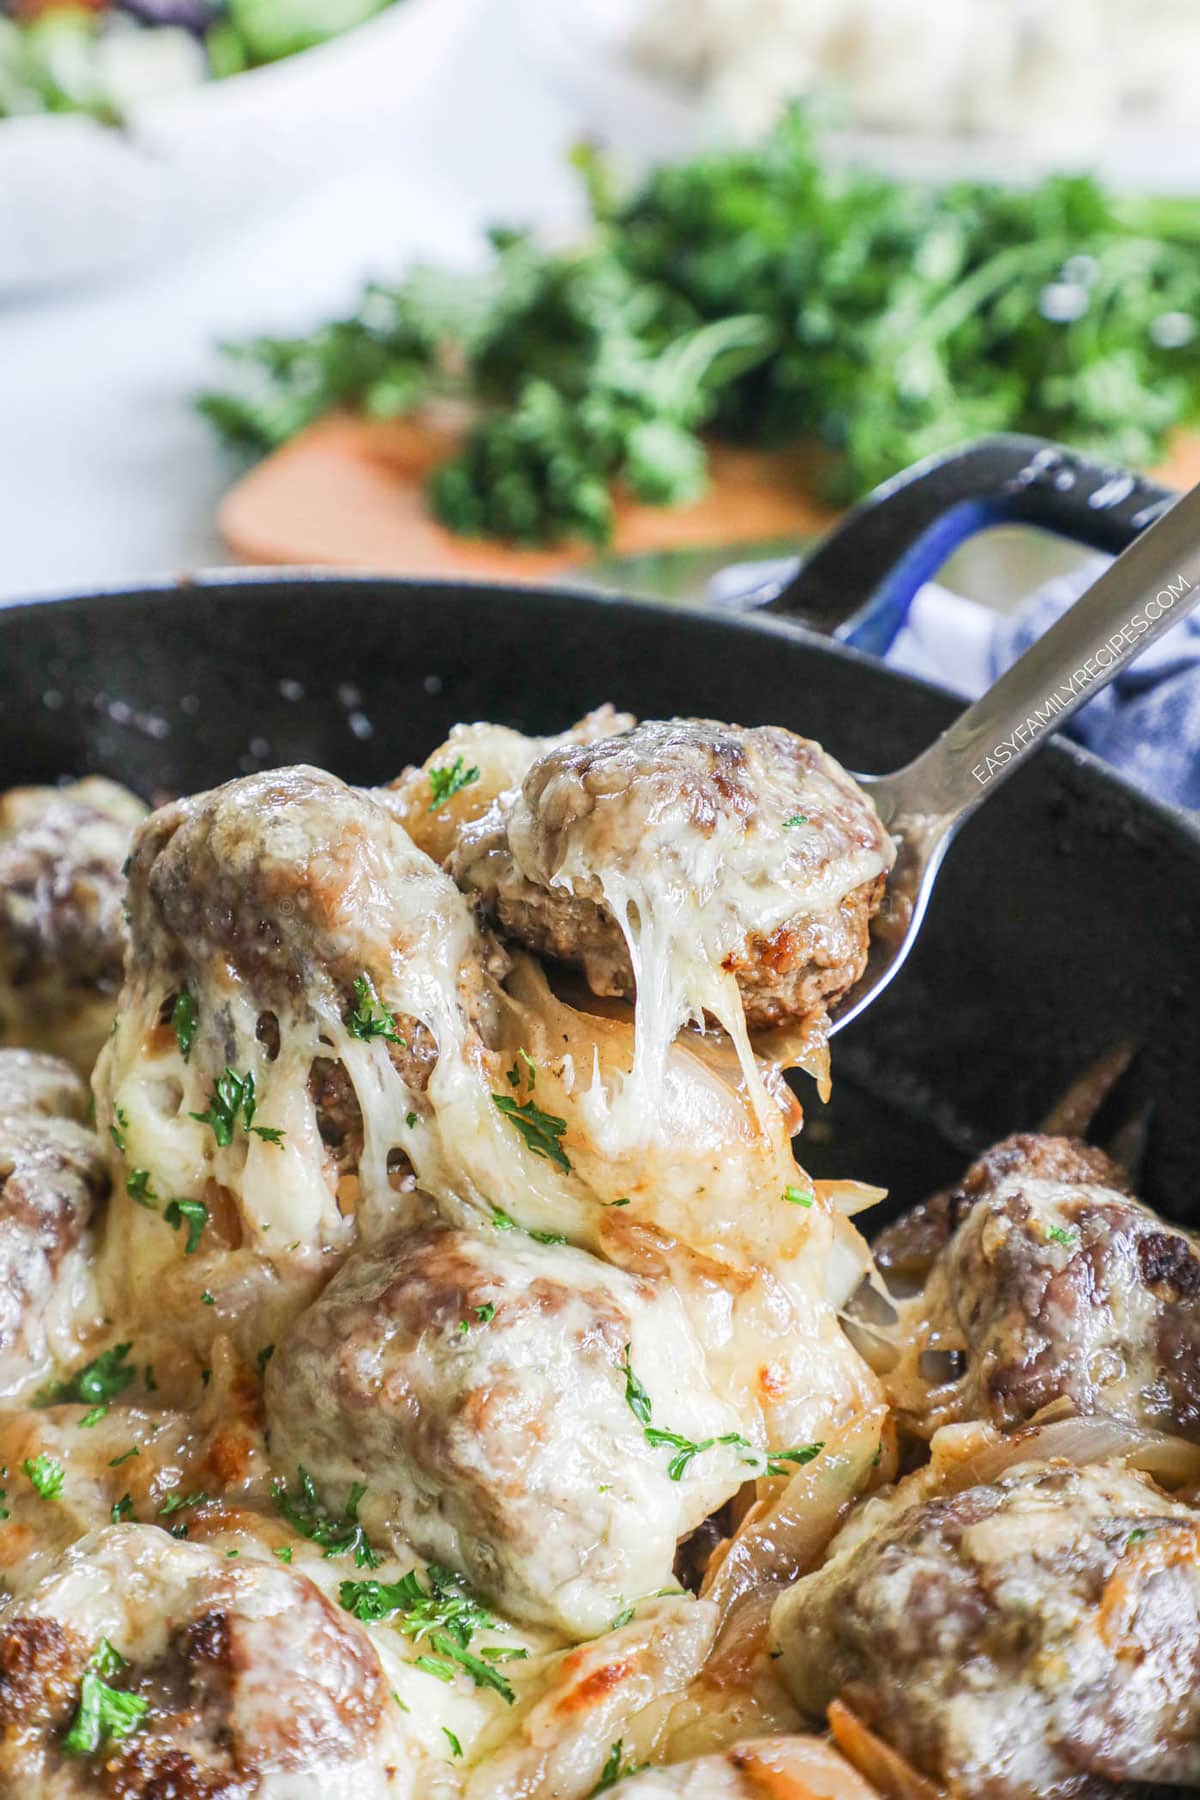 French onion meatballs being lifted from skillet to serve for dinner